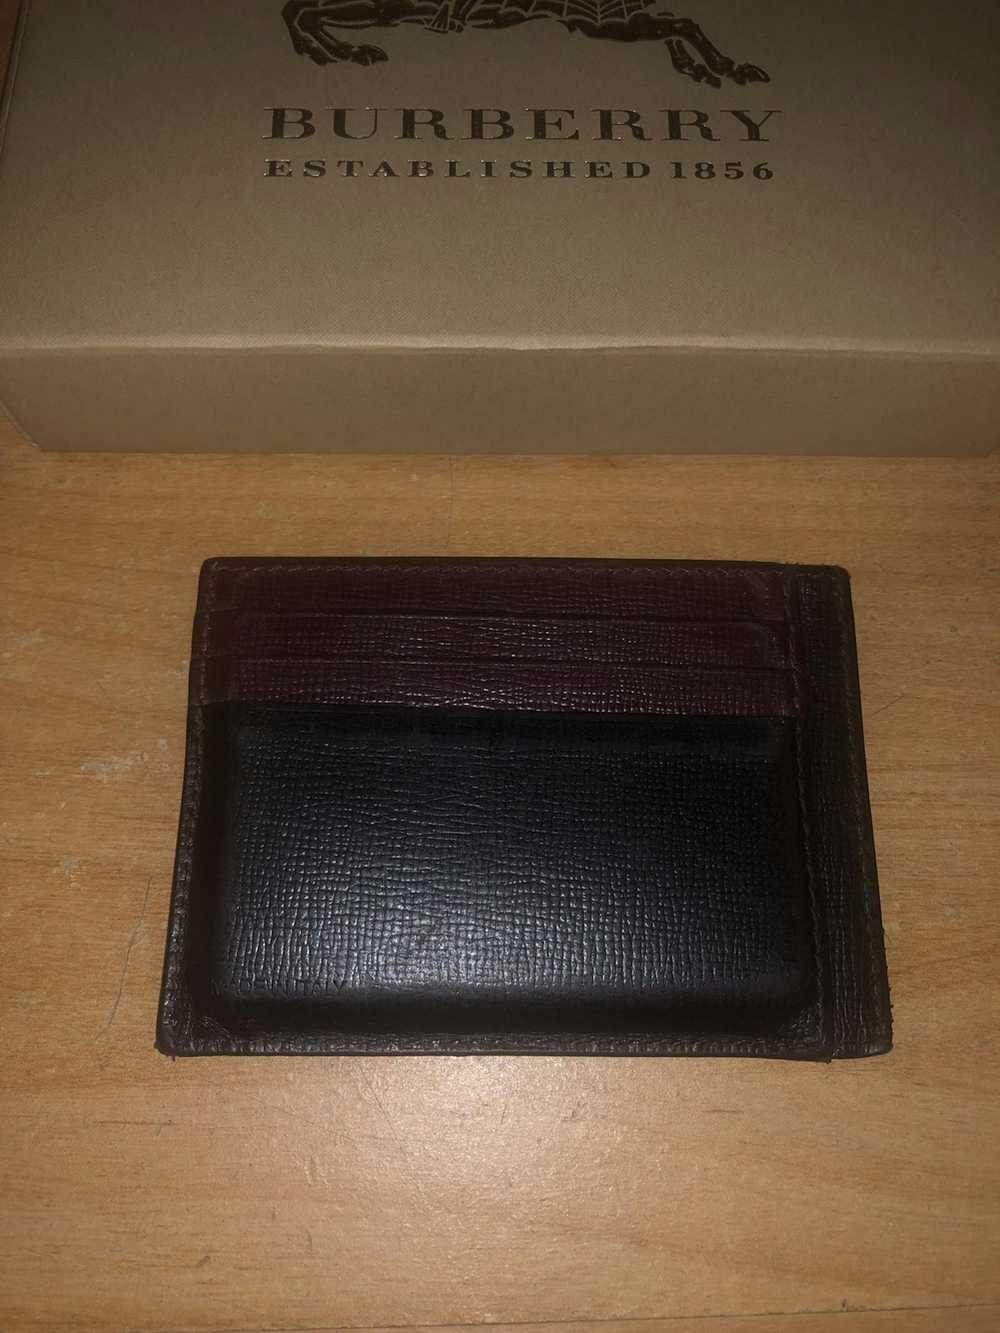 Burberry Authentic 9-Slot Burberry Card holder - image 3